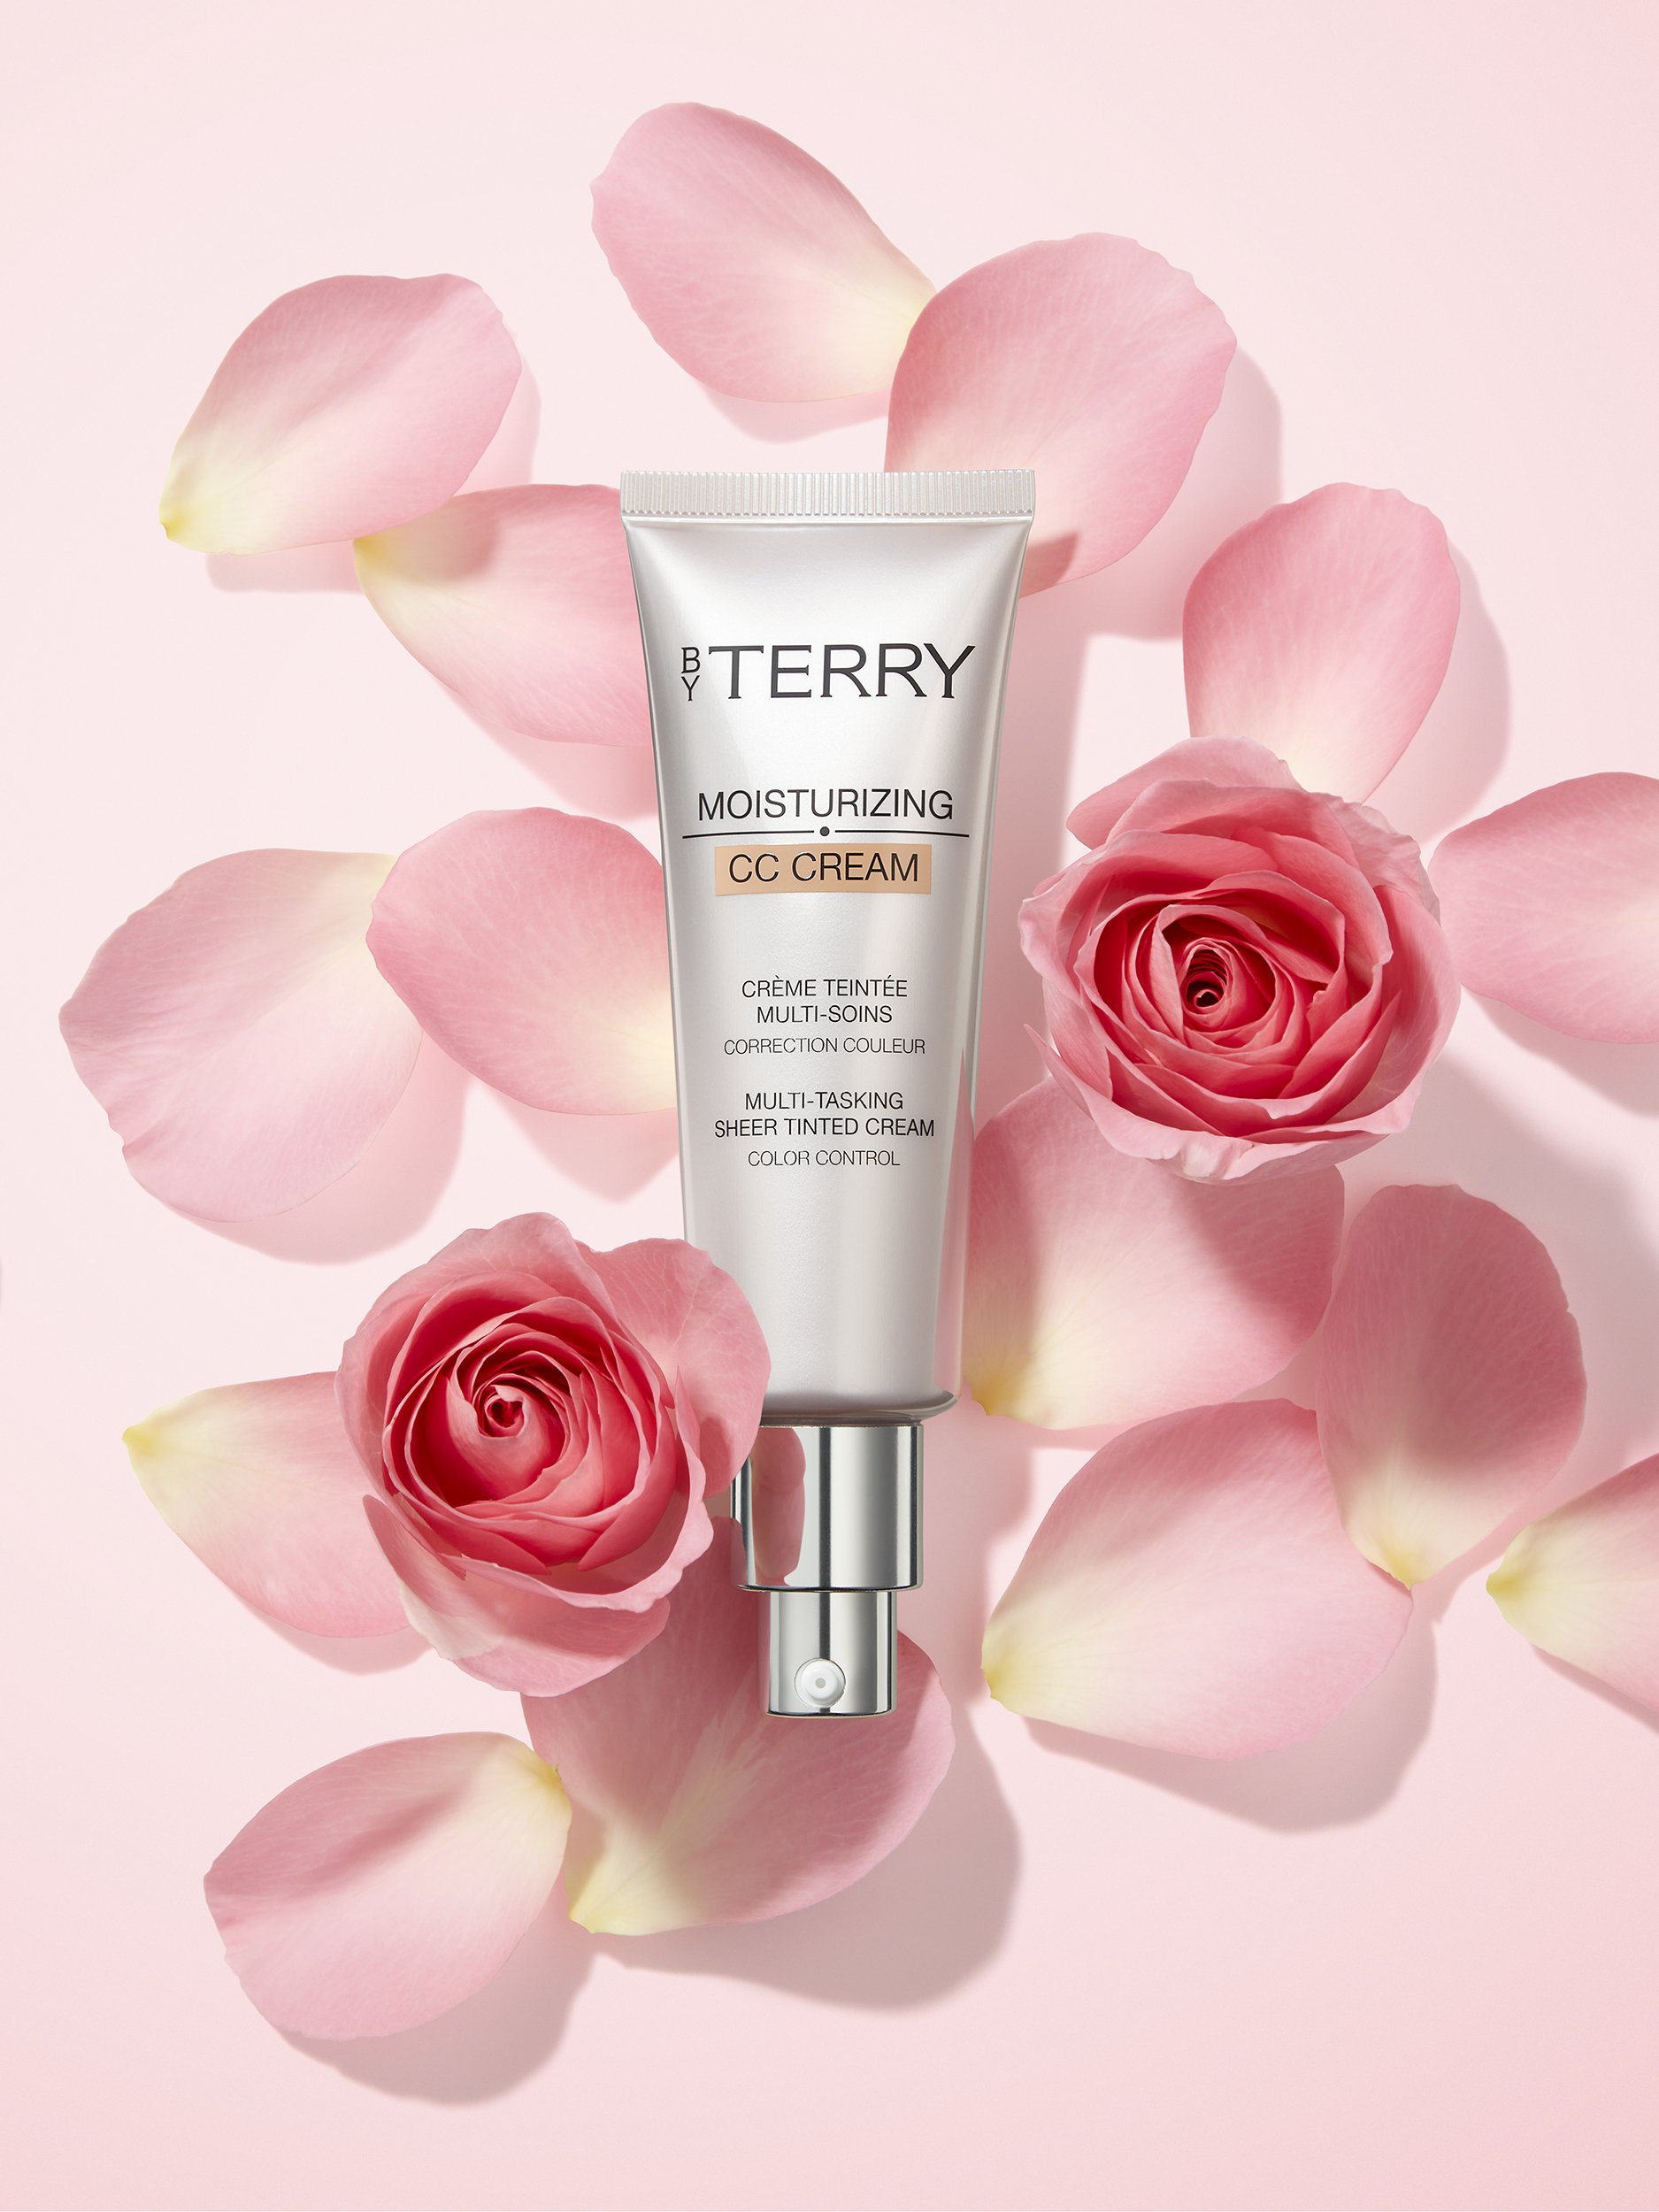 ByTerry CC Cream - beauty product photography by Simon Lyle Ritchie